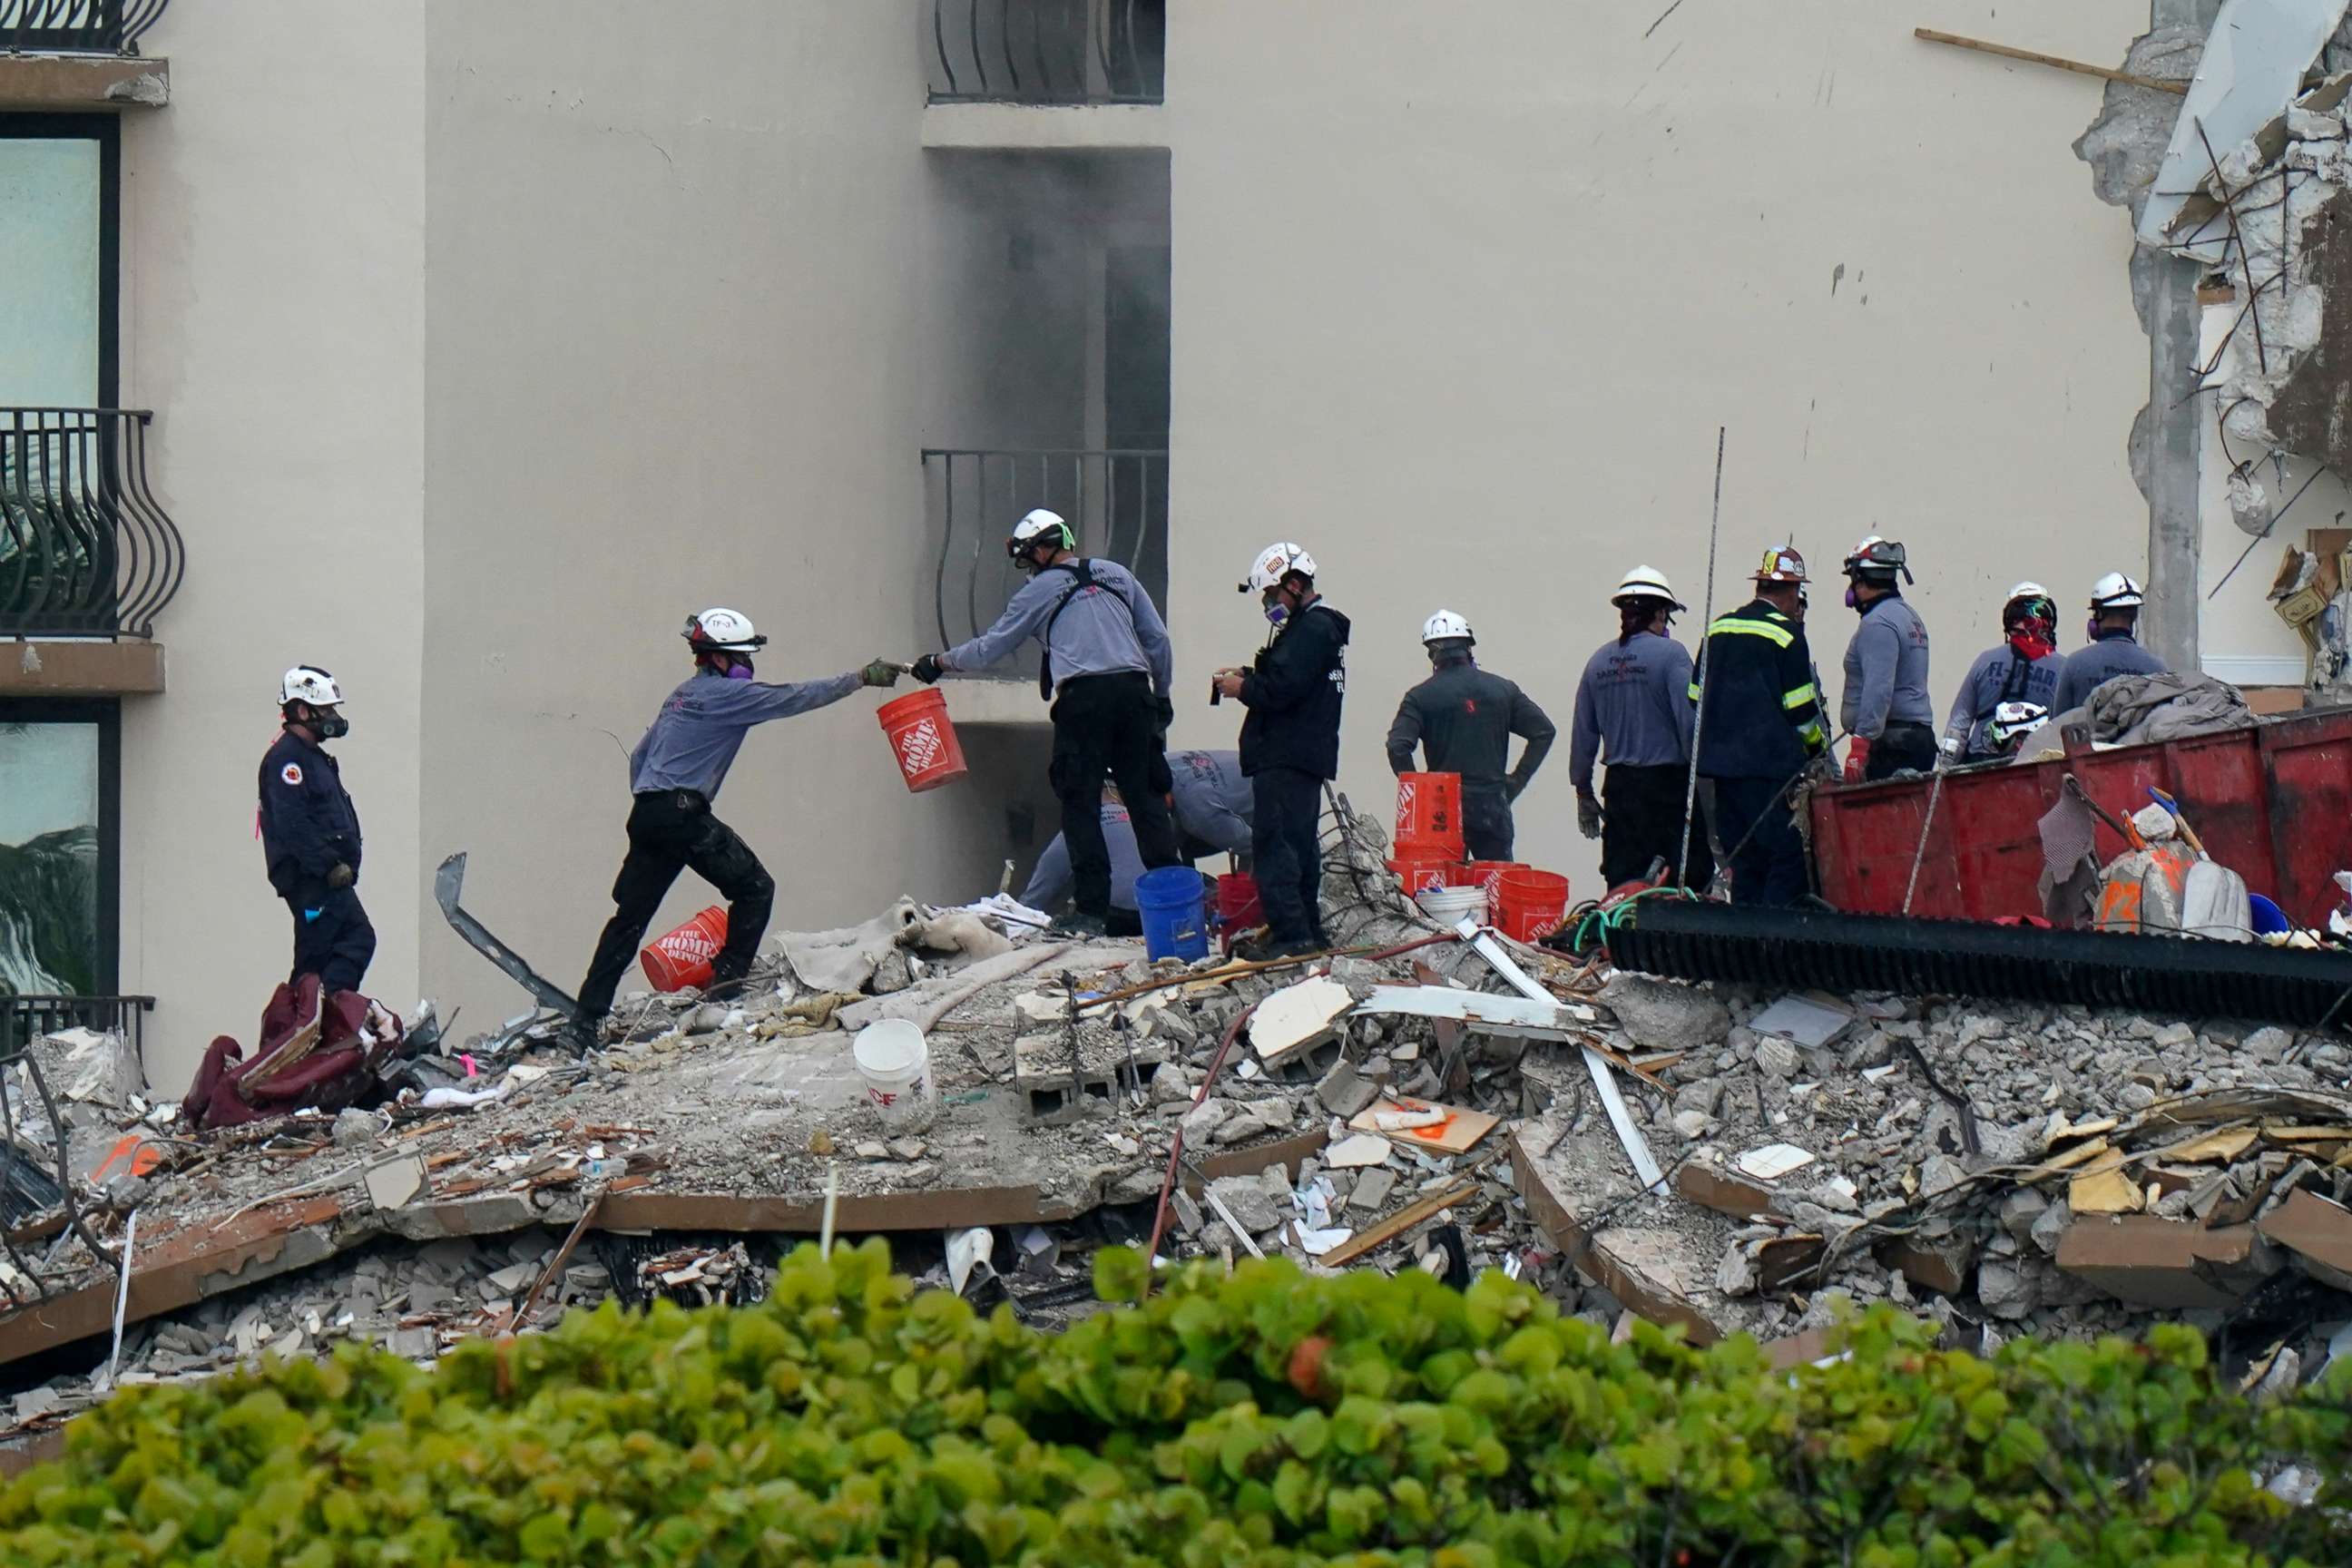 PHOTO: Search and rescue personnel pass buckets as they work atop the rubble at the Champlain Towers South condo building, where scores of people remain missing almost a week after it partially collapsed, June 30, 2021, in Surfside, Fla.